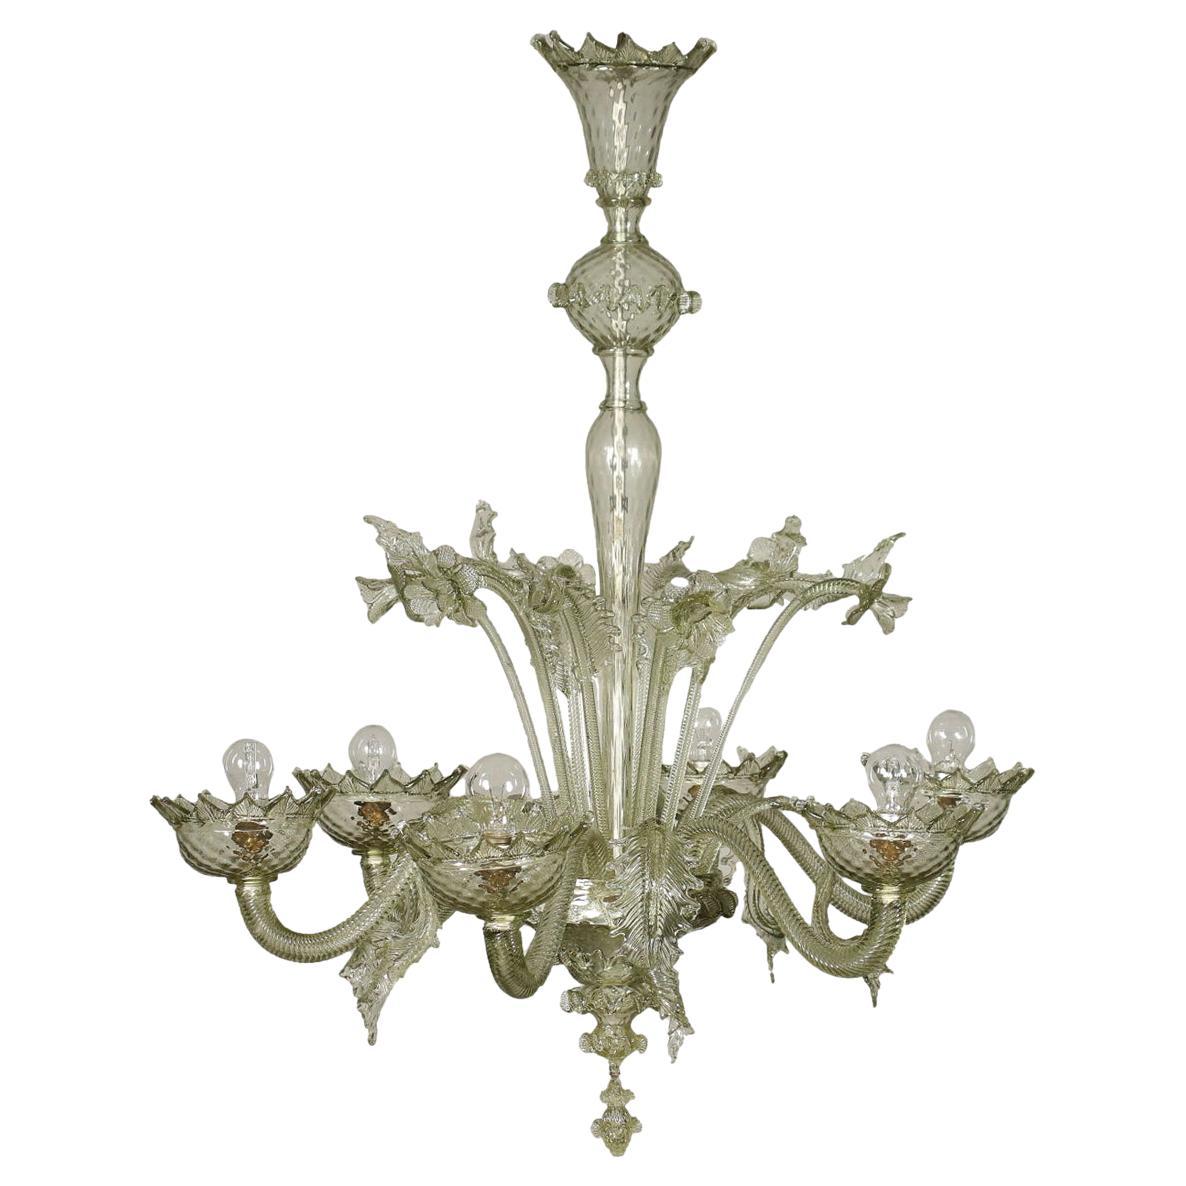 Chandelier Blown Glass Murano Italy Early 20th Century